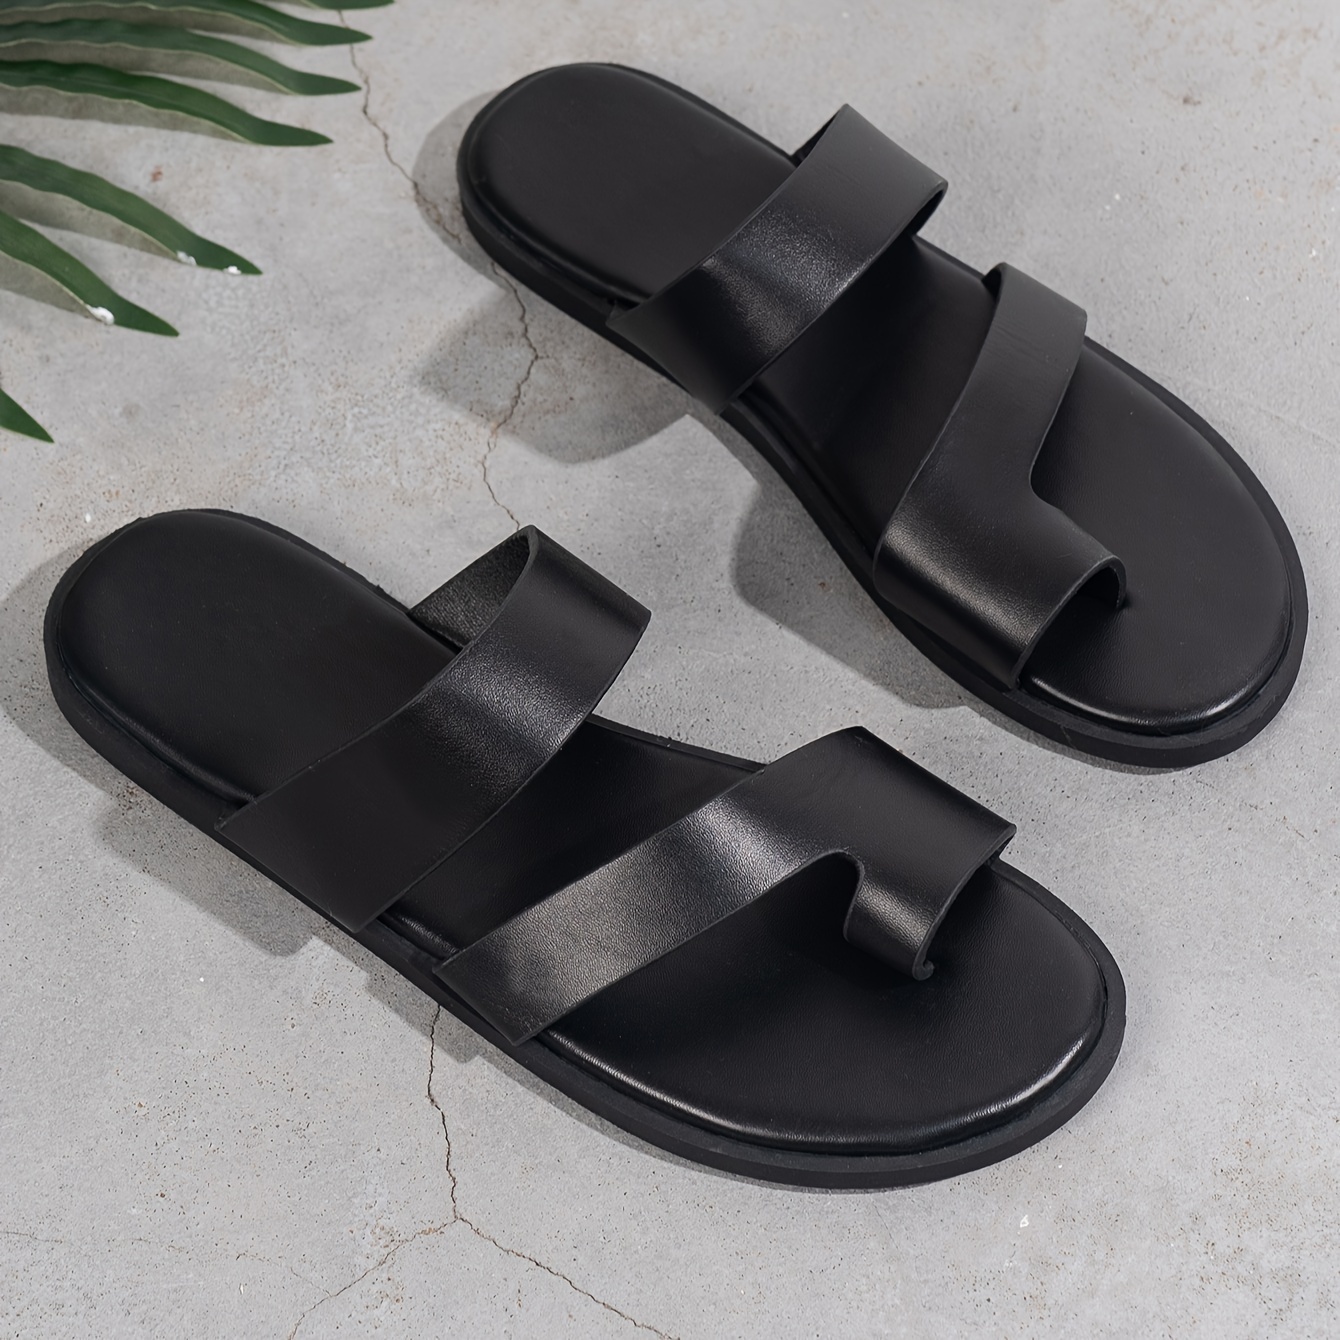 

Men's Pu Leather Thong Sandals, Casual Non Slip Flip-flops Shoes Toe Post Sandals For Indoor Outdoor Walking, Beach Shoes For Spring And Summer